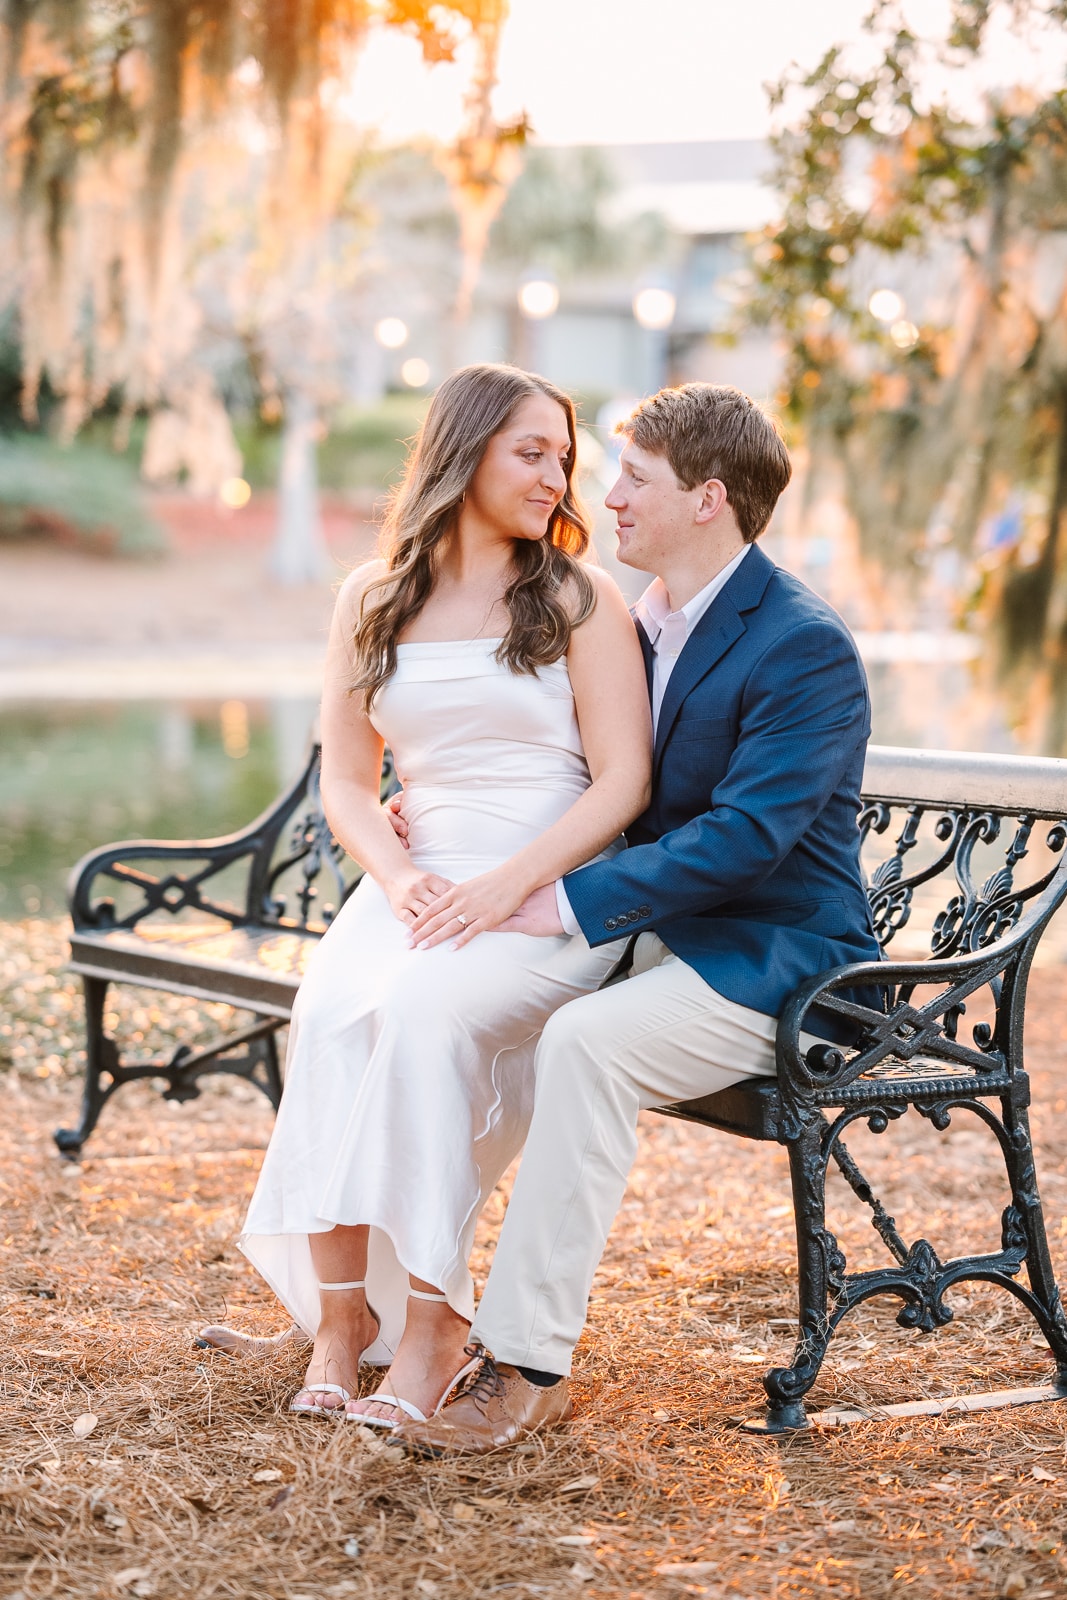 Bride sits on Grooms lap for engagement photos in Fairhope Al